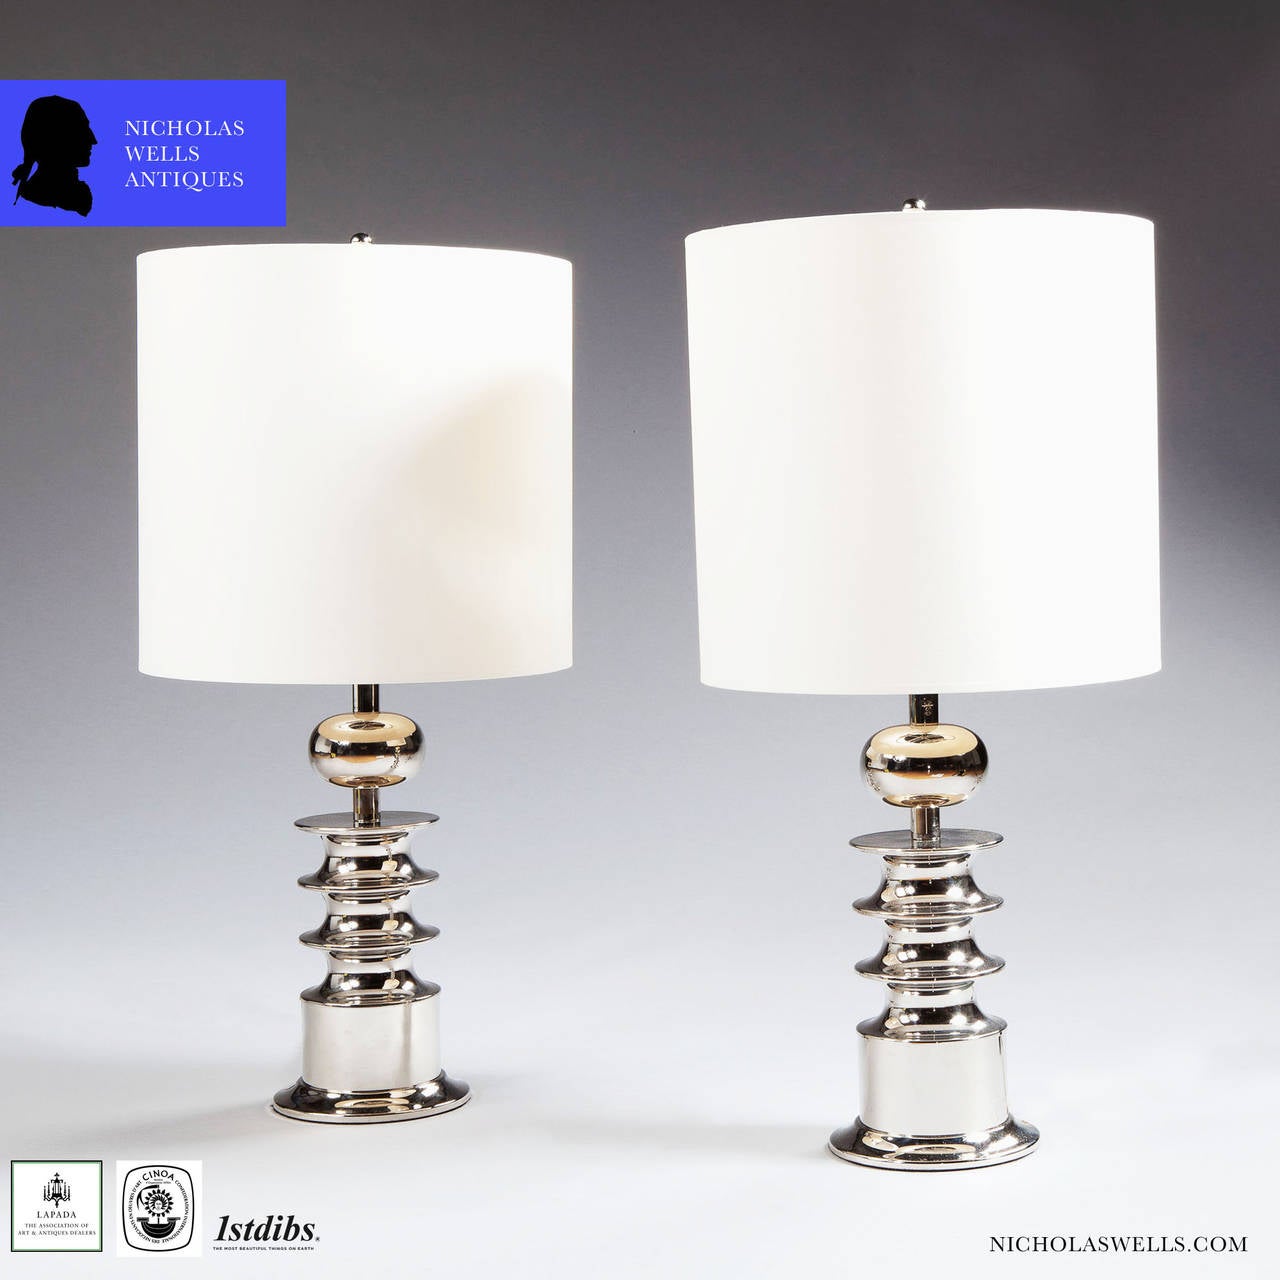 Pair of Nickel-Plated Italian Mid-Century Lamps In Excellent Condition In London, by appointment only